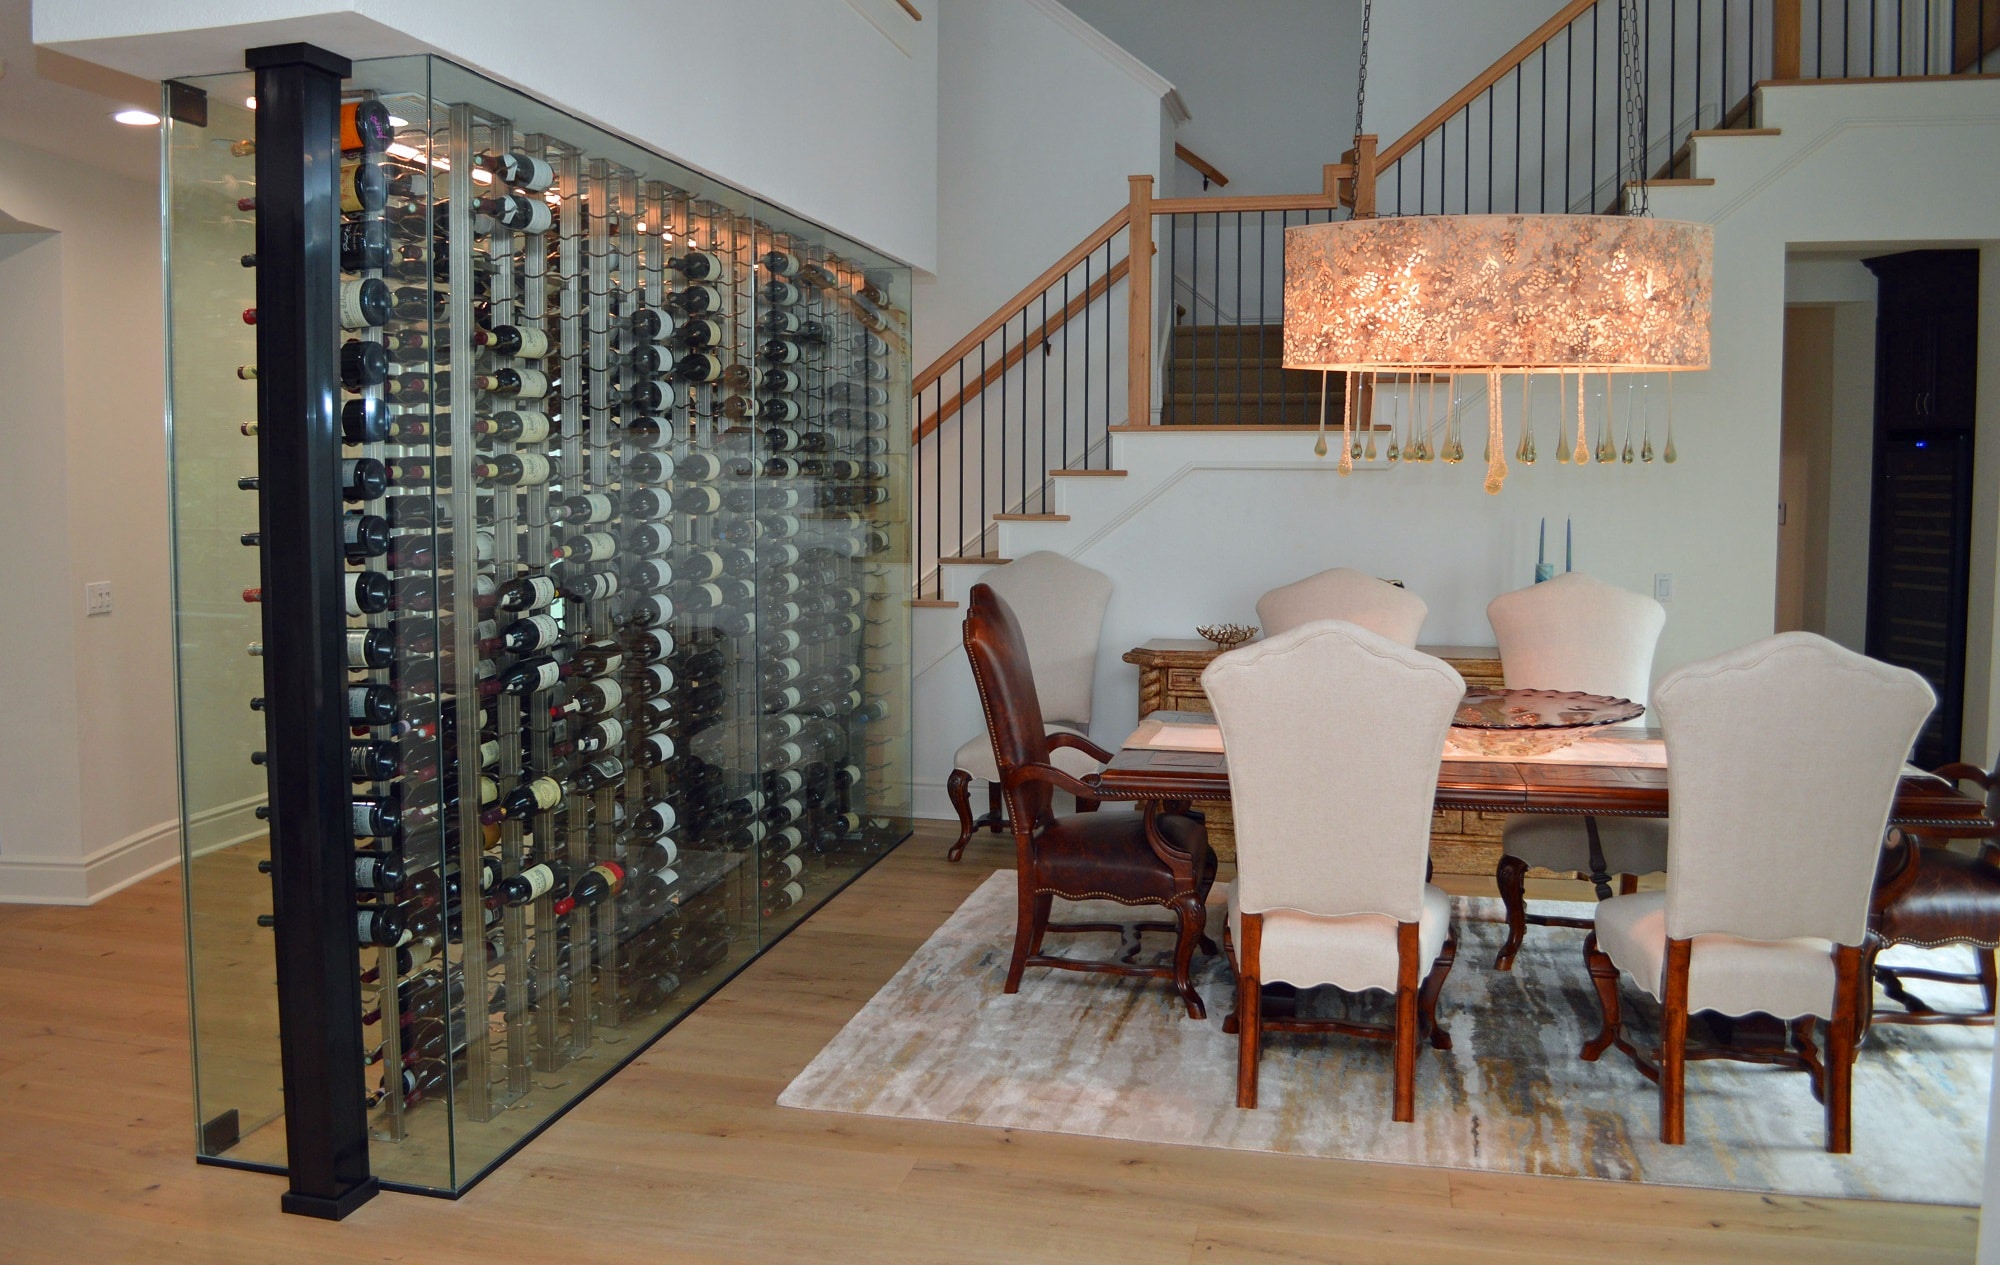 Wine Color Dining Room With Window